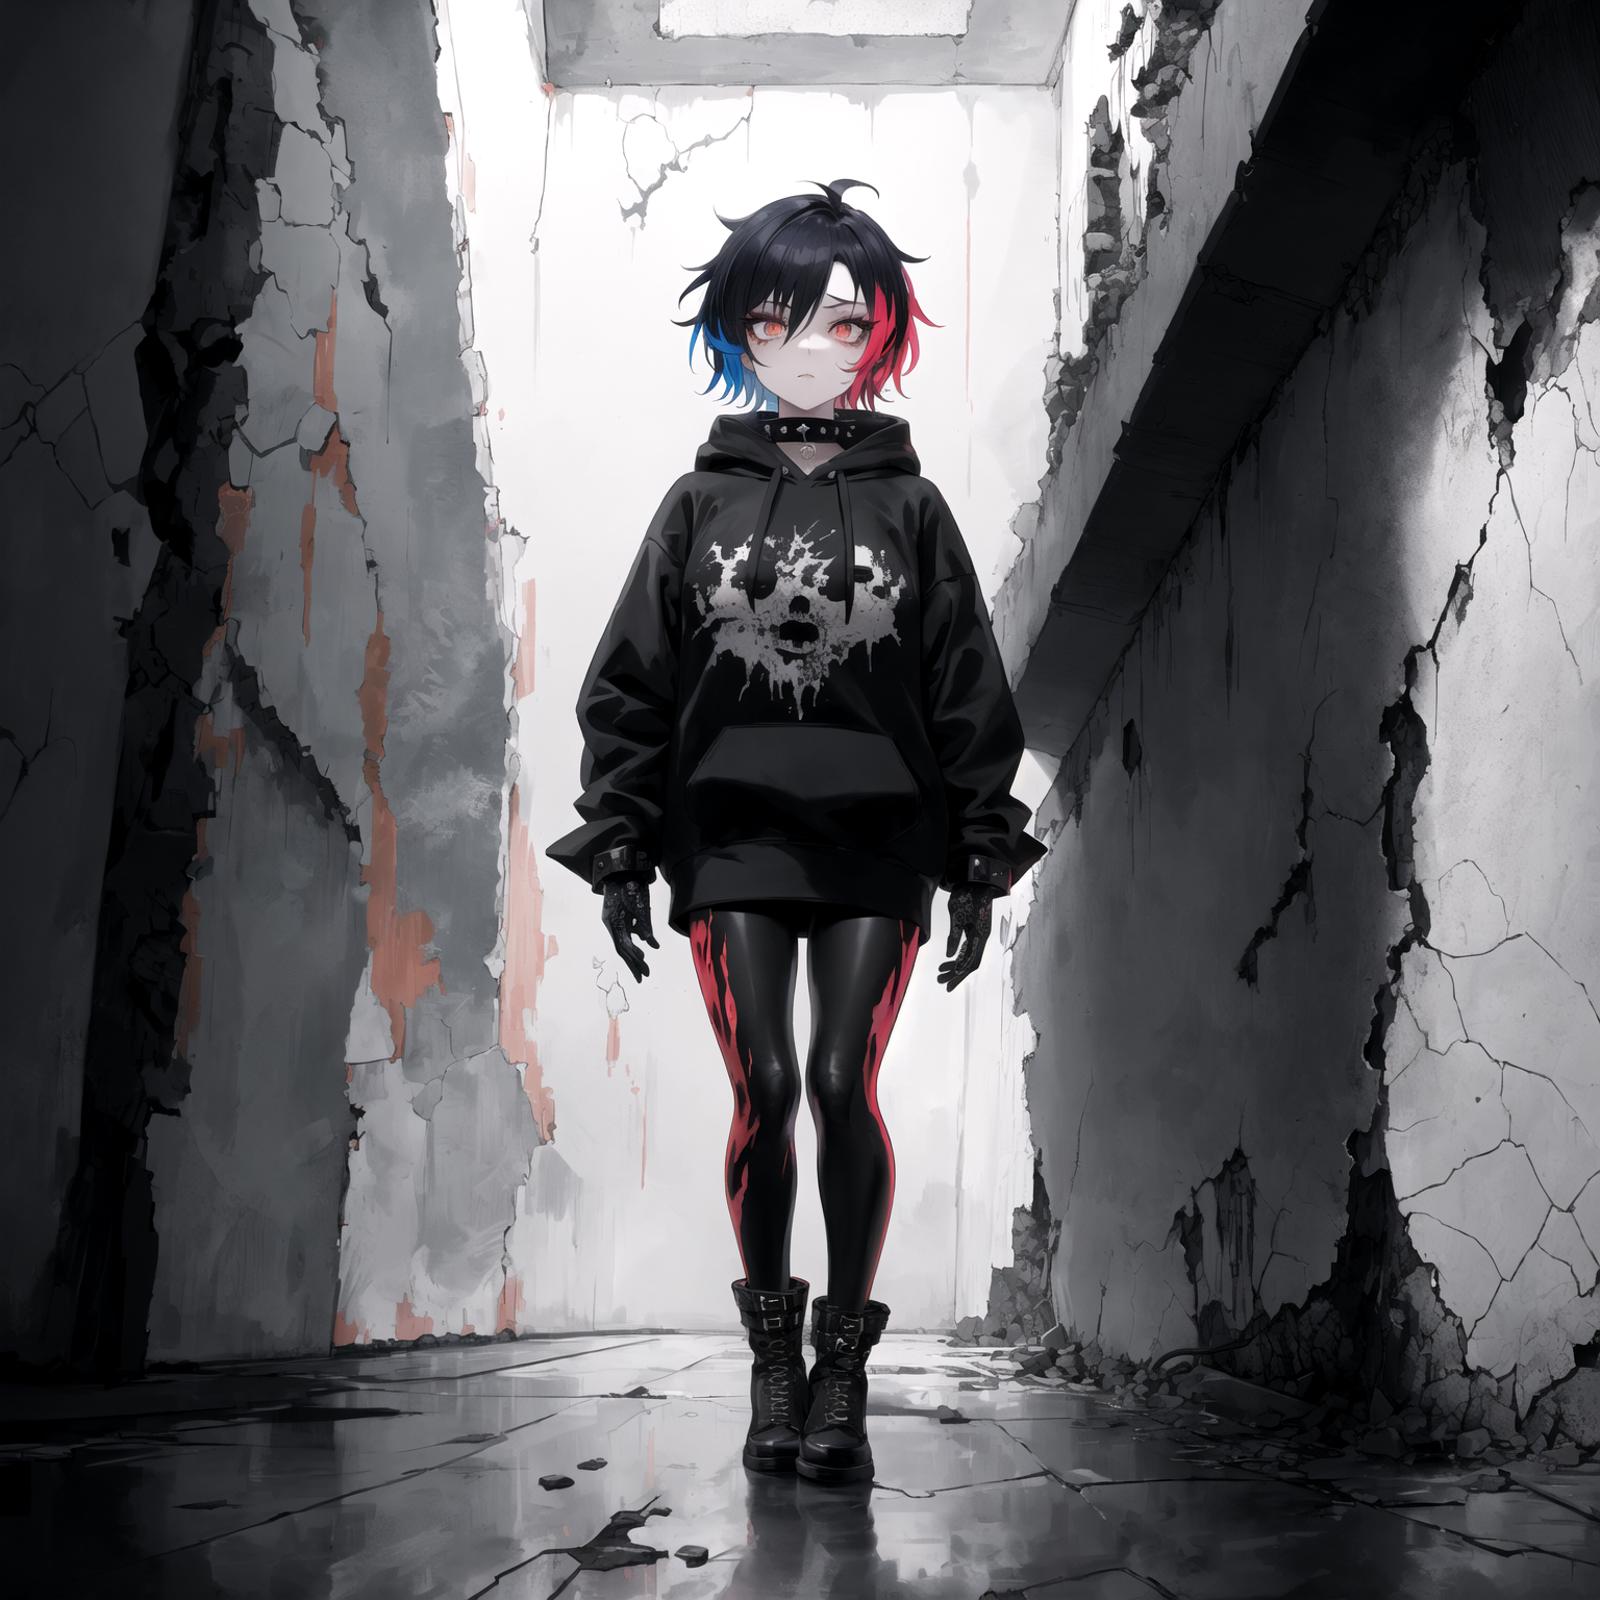 SpiritMix - Rival (2D Anime) image by michaelpstanich